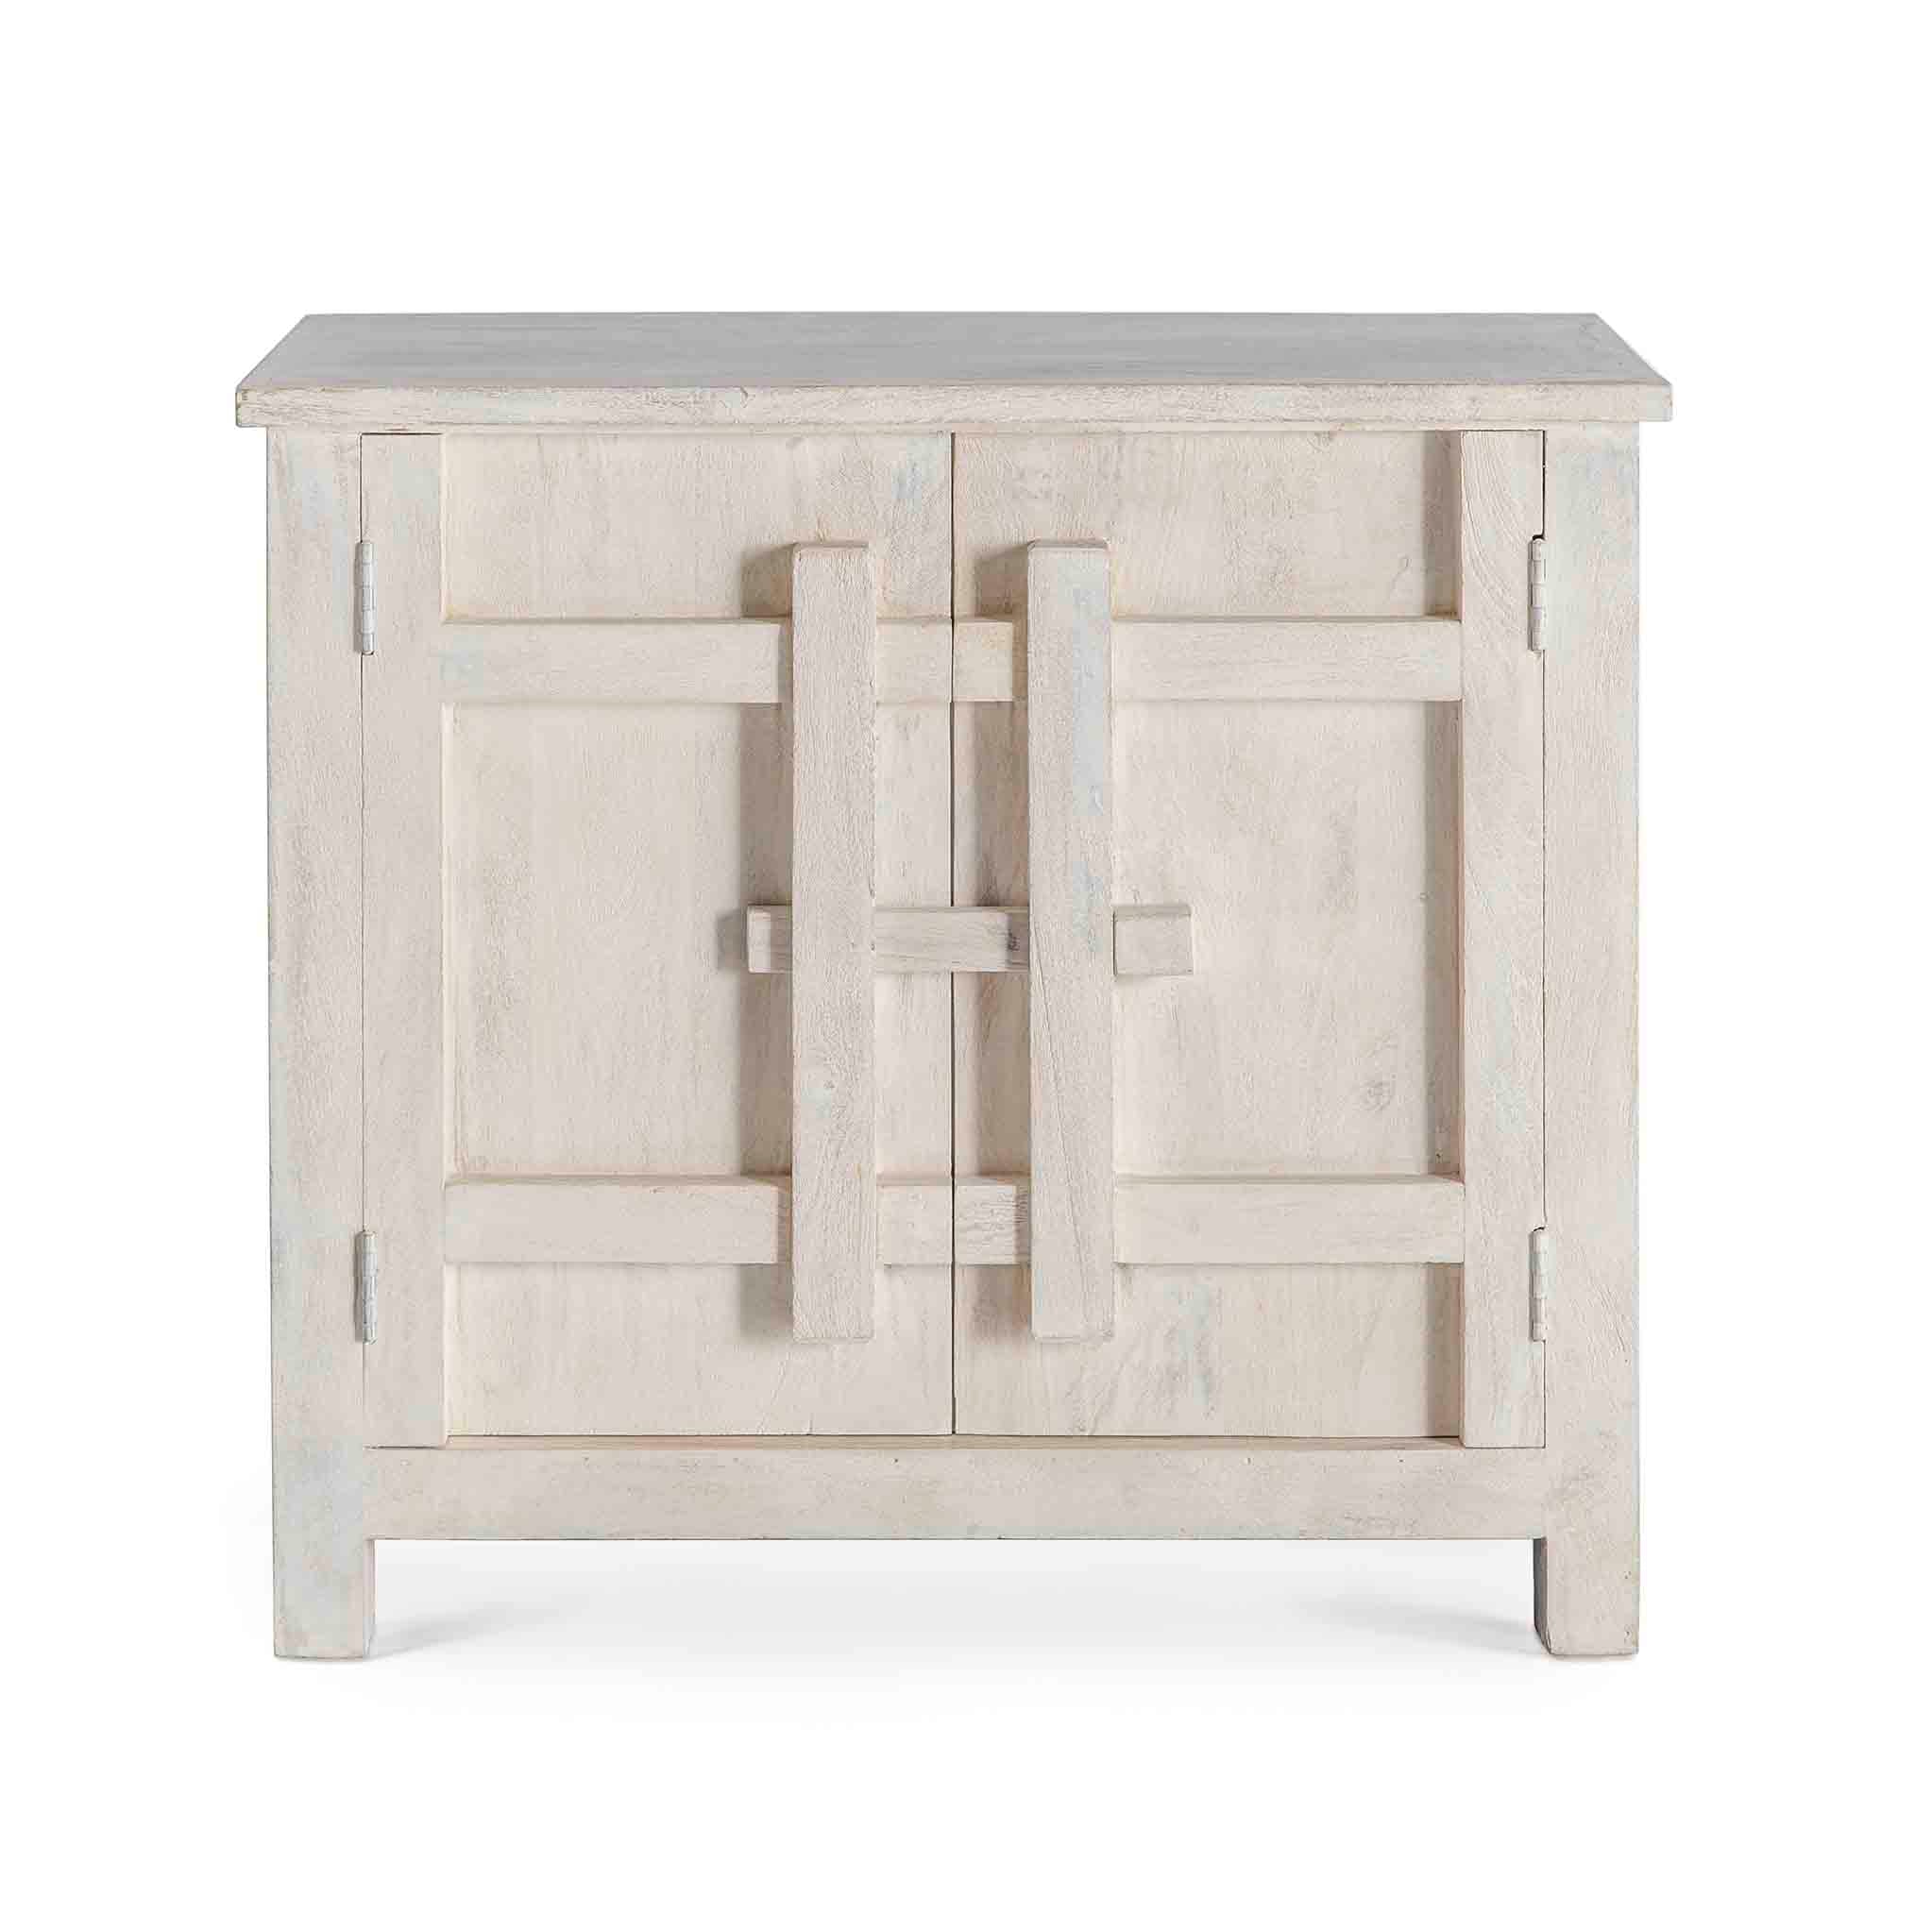 Eastern Vintage 2 Door Storage Cupboard Stylish Shabby Chic White Washed Asian Indian Inspired Small Sideboard Cabinet